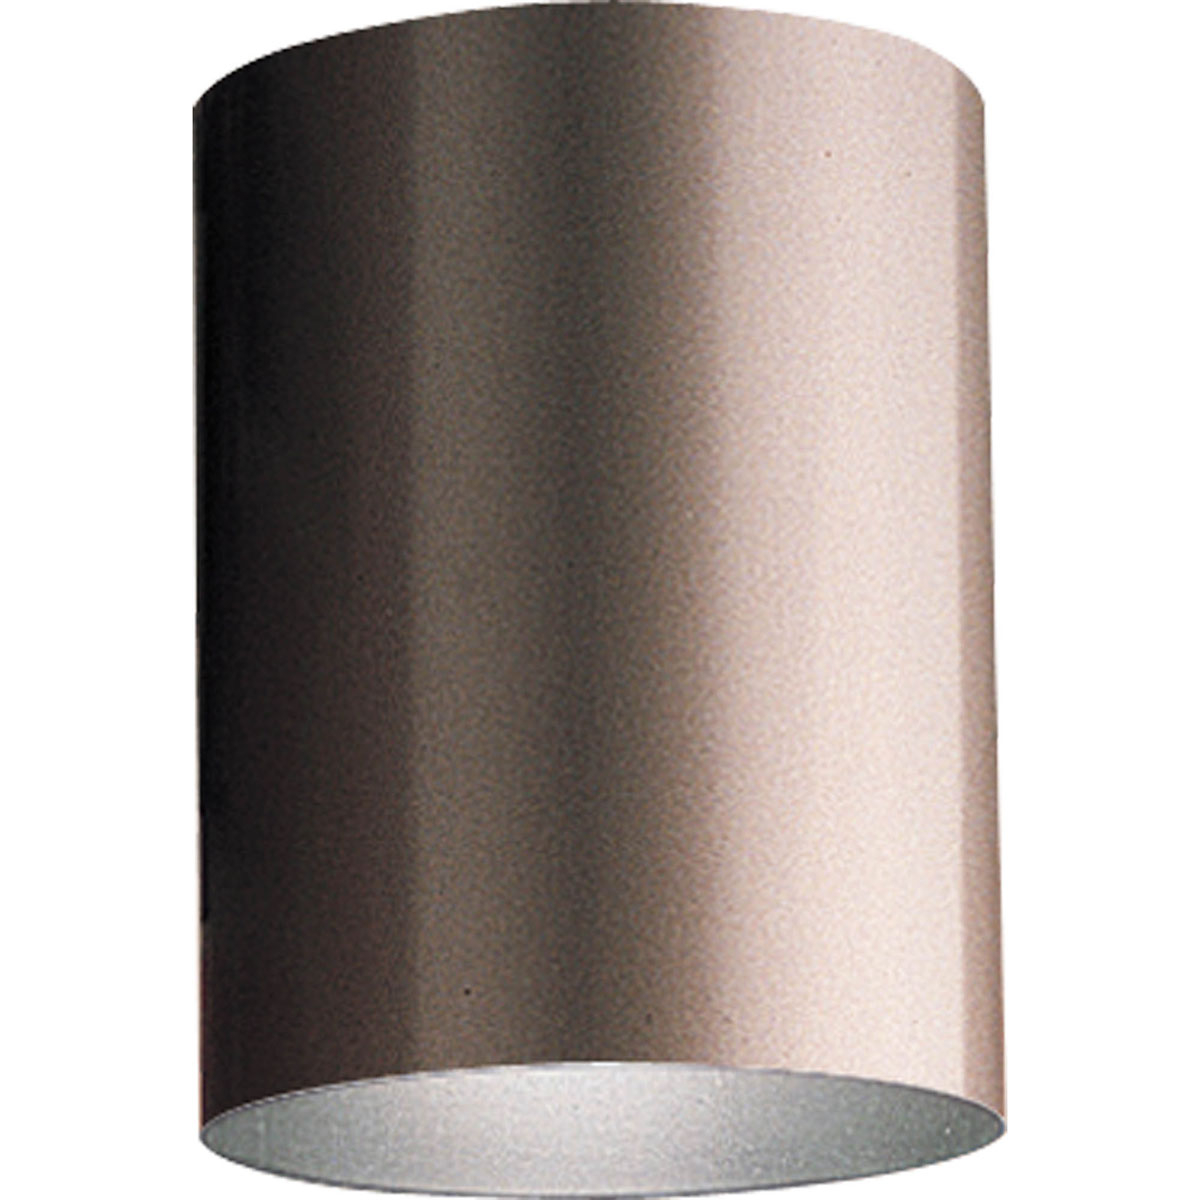 5 in flush mount cylinder in Antique Bronze. This outdoor ceiling mount is ideal for a wide variety of interior and exterior applications including residential and commercial. The Cylinders feature a 120V alternating current source and eliminates the need for a traditional LED driver. This modular approach results in an encapsulated luminaire that unites performance, cost and safety benefits.